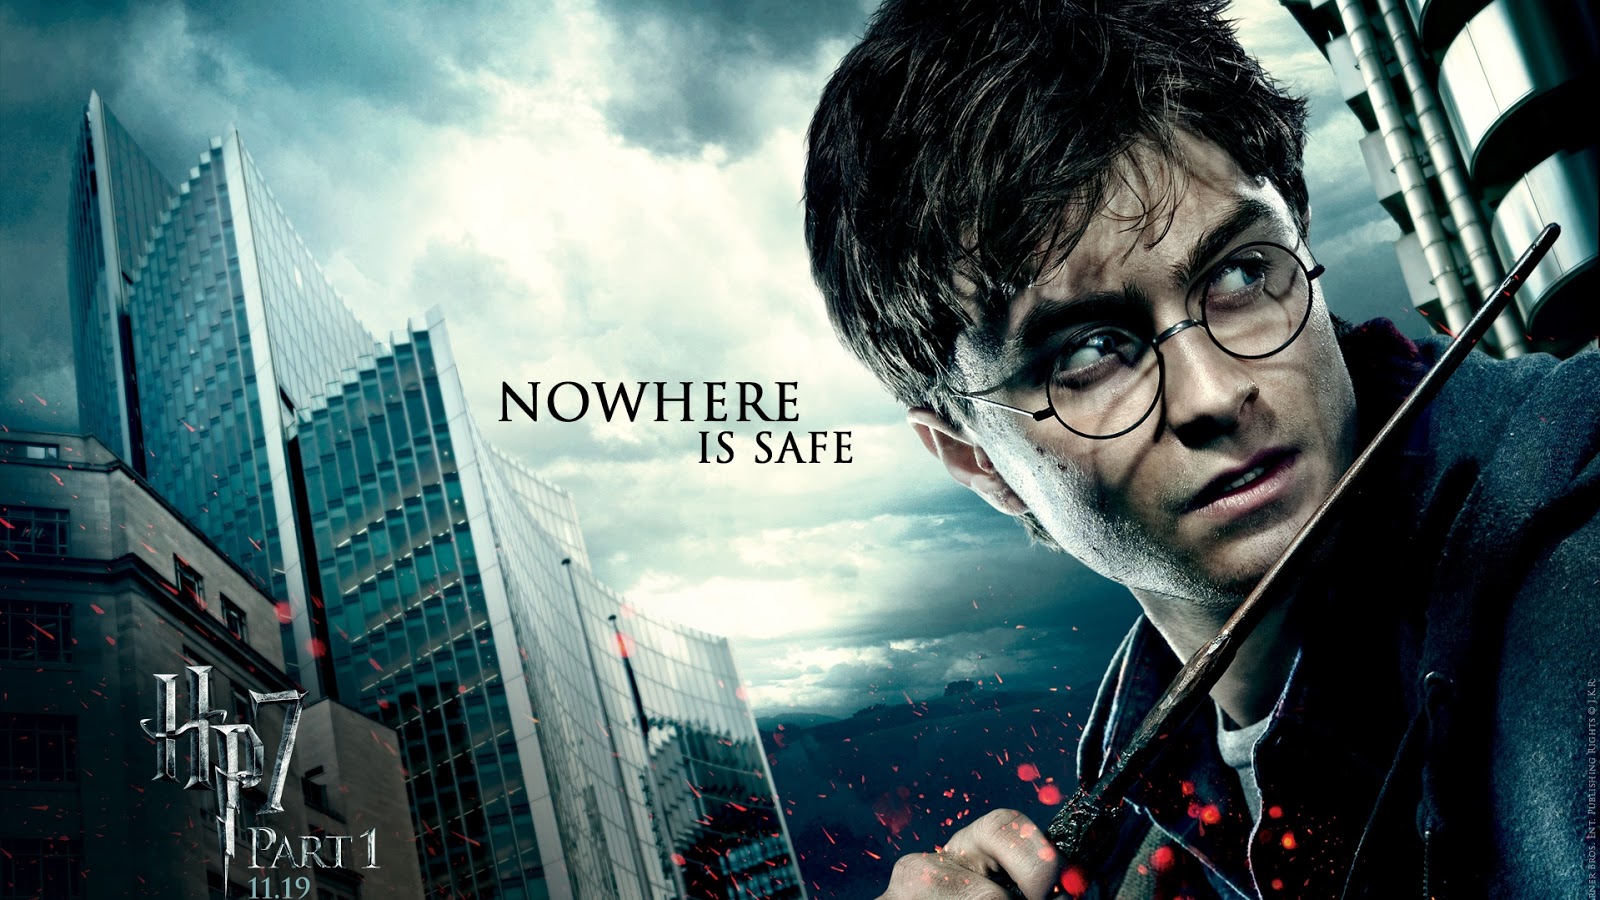 HDMOU TOP 24 LATEST HARRY POTTER WALLPAPERS IN HD